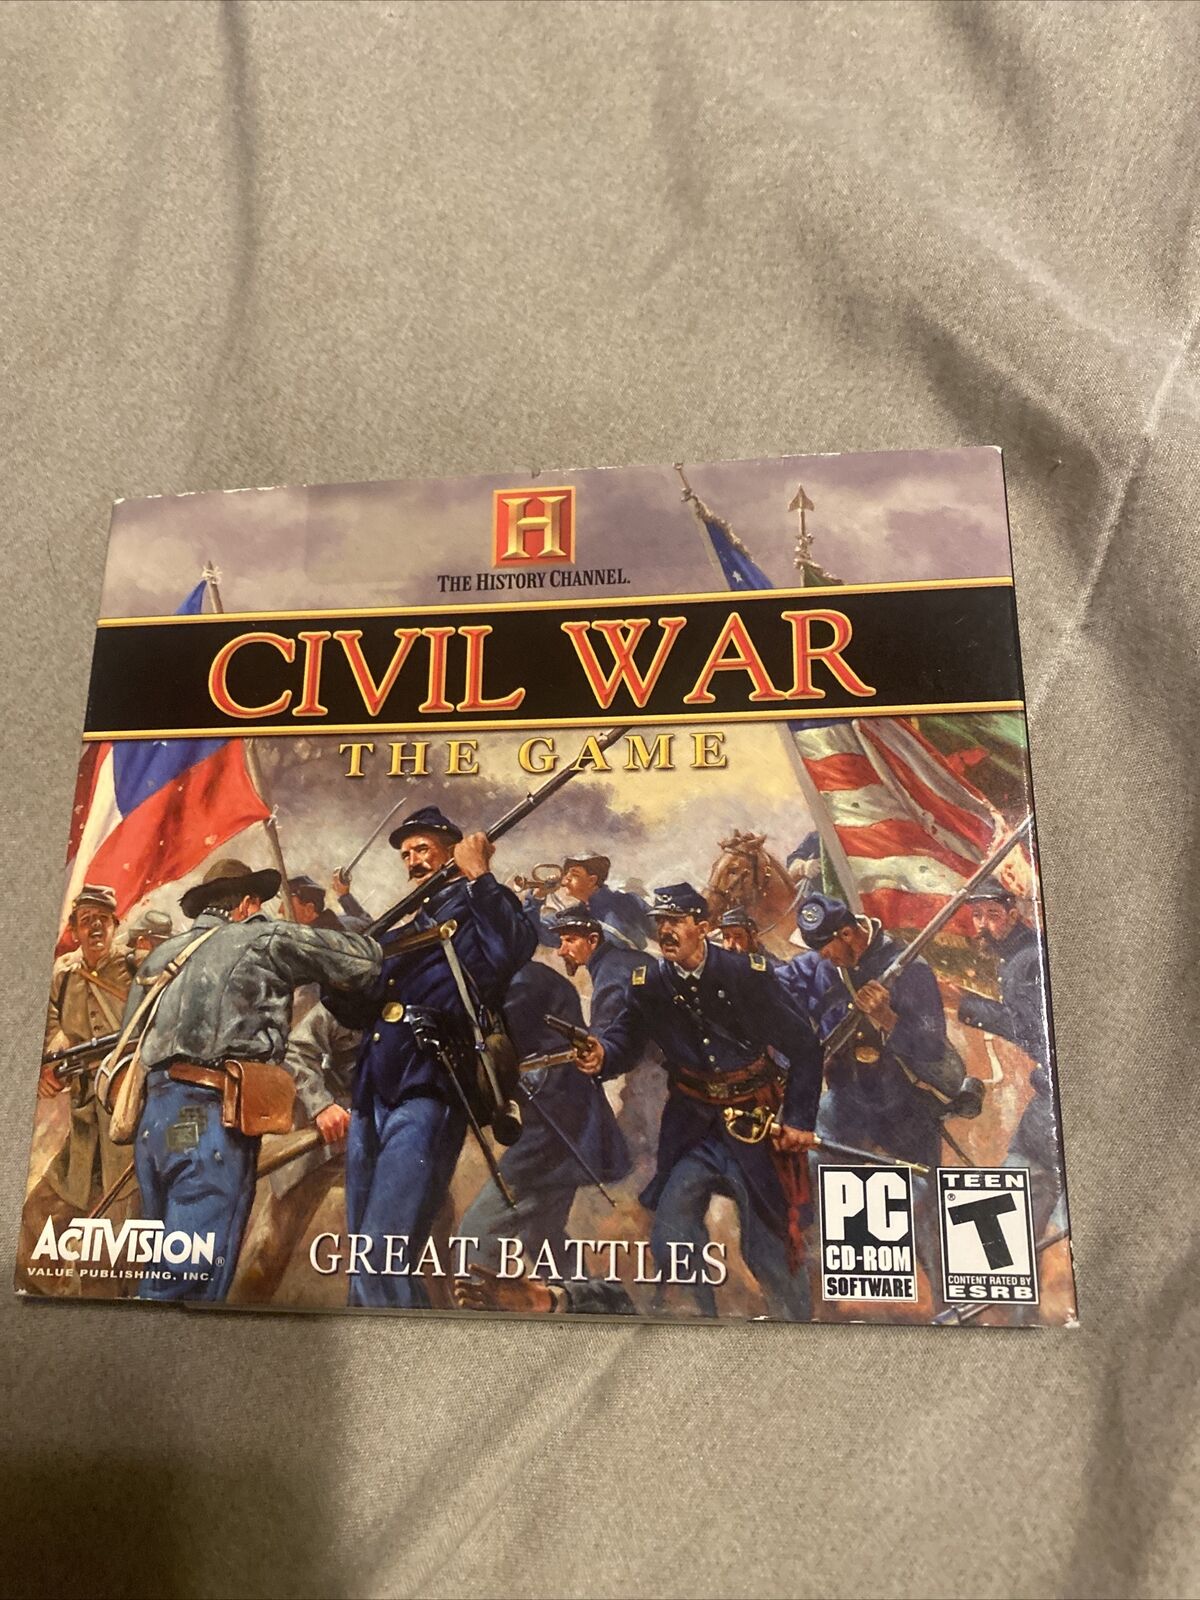 The History Channel CIVIL WAR THE GAME Great Battles PC 2002 Activision